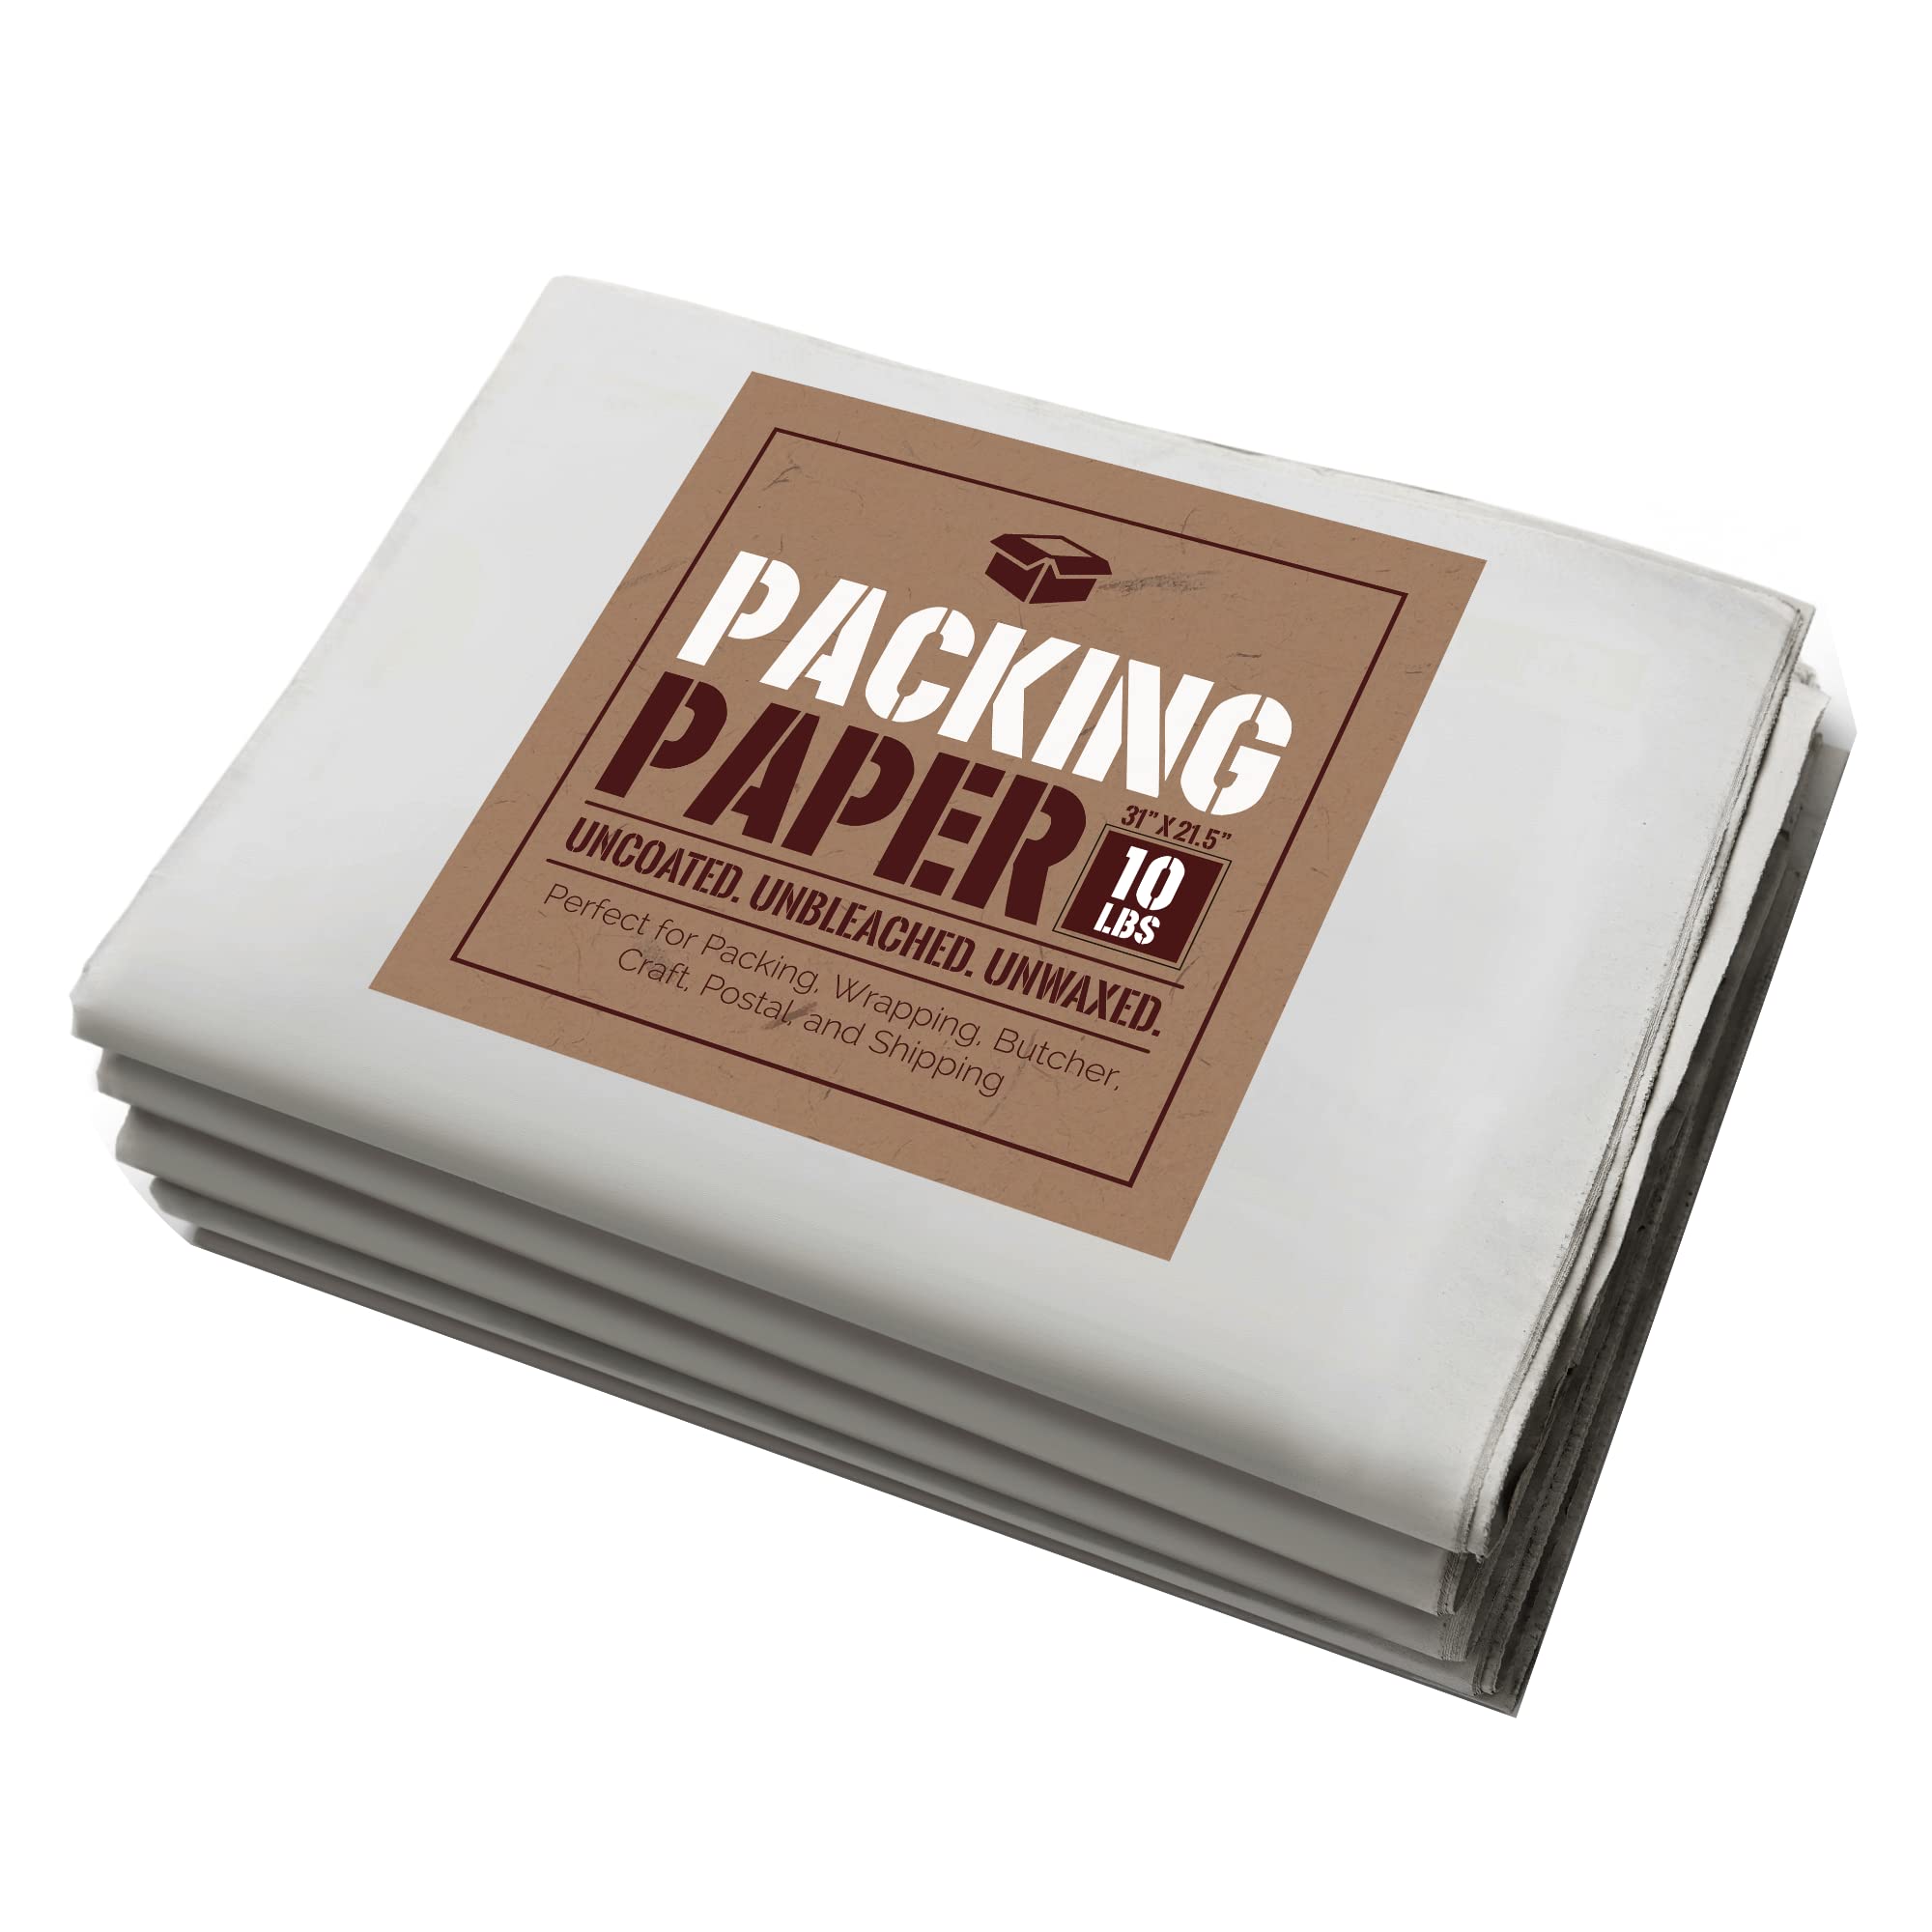 10 Pounds of Quality Packing Paper by Tenby Living, 31 x 21.5 inch